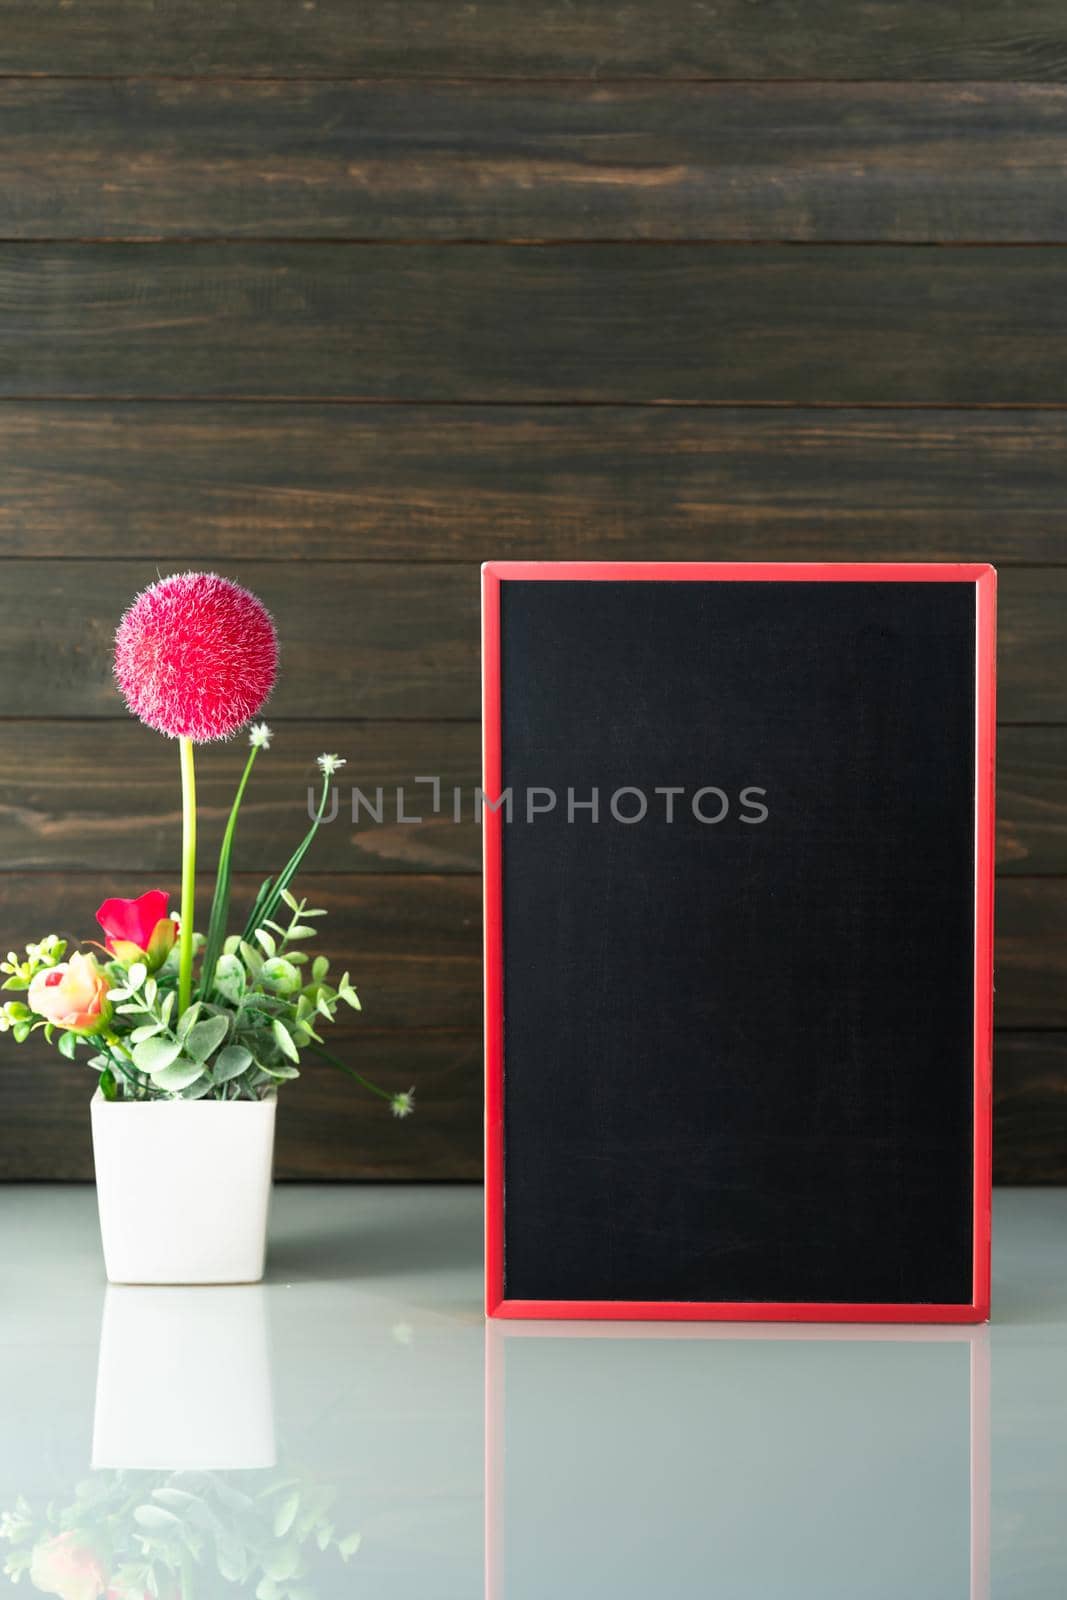 Flower vase and blank chalkboard on table near wood background